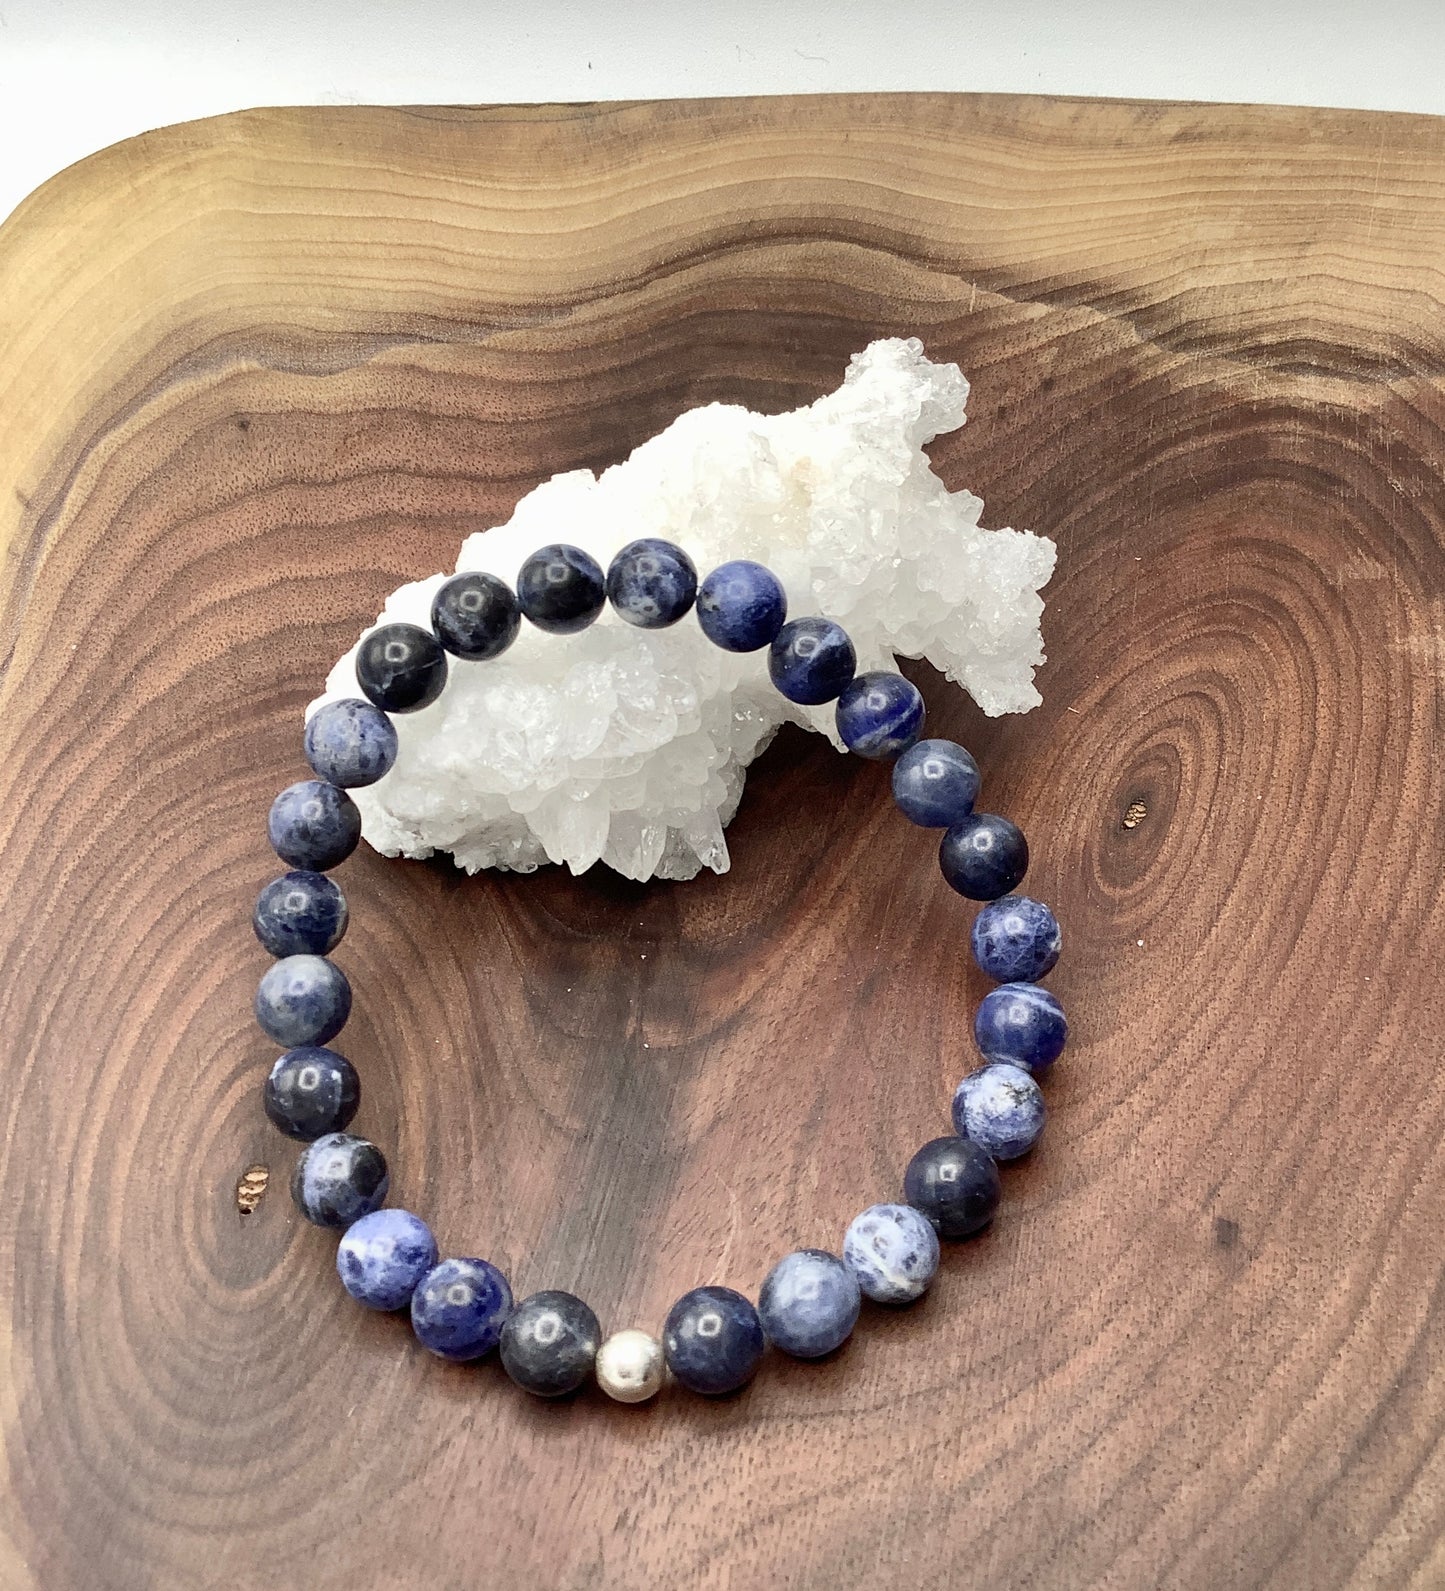 Sodalite bracelet with Sterling Silver Bead